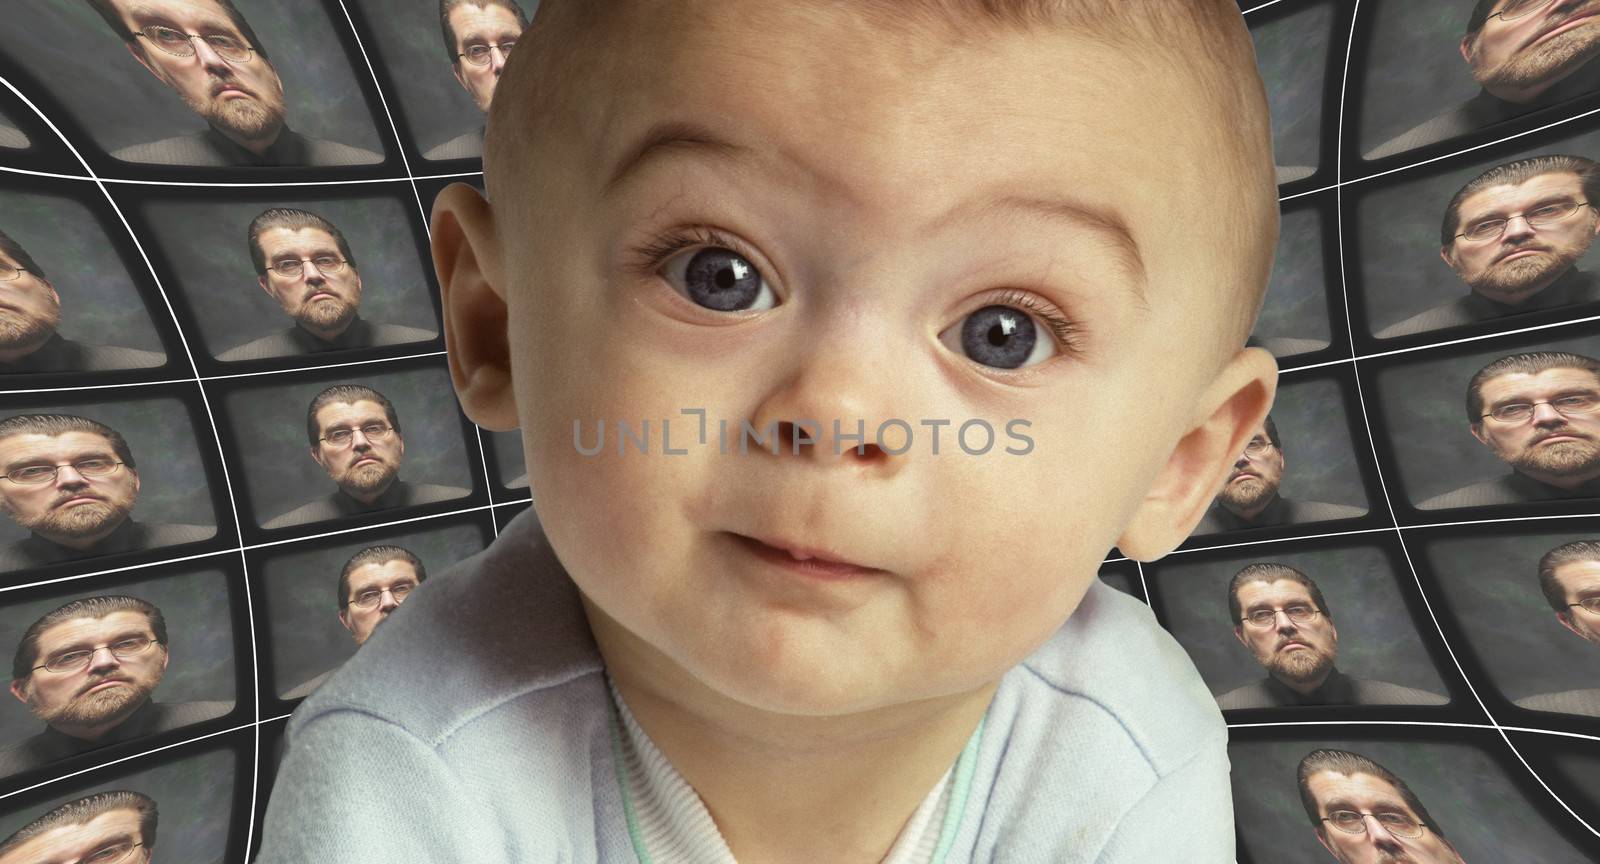 A baby facing the camera surrounded by distorted screens of an O by Balefire9